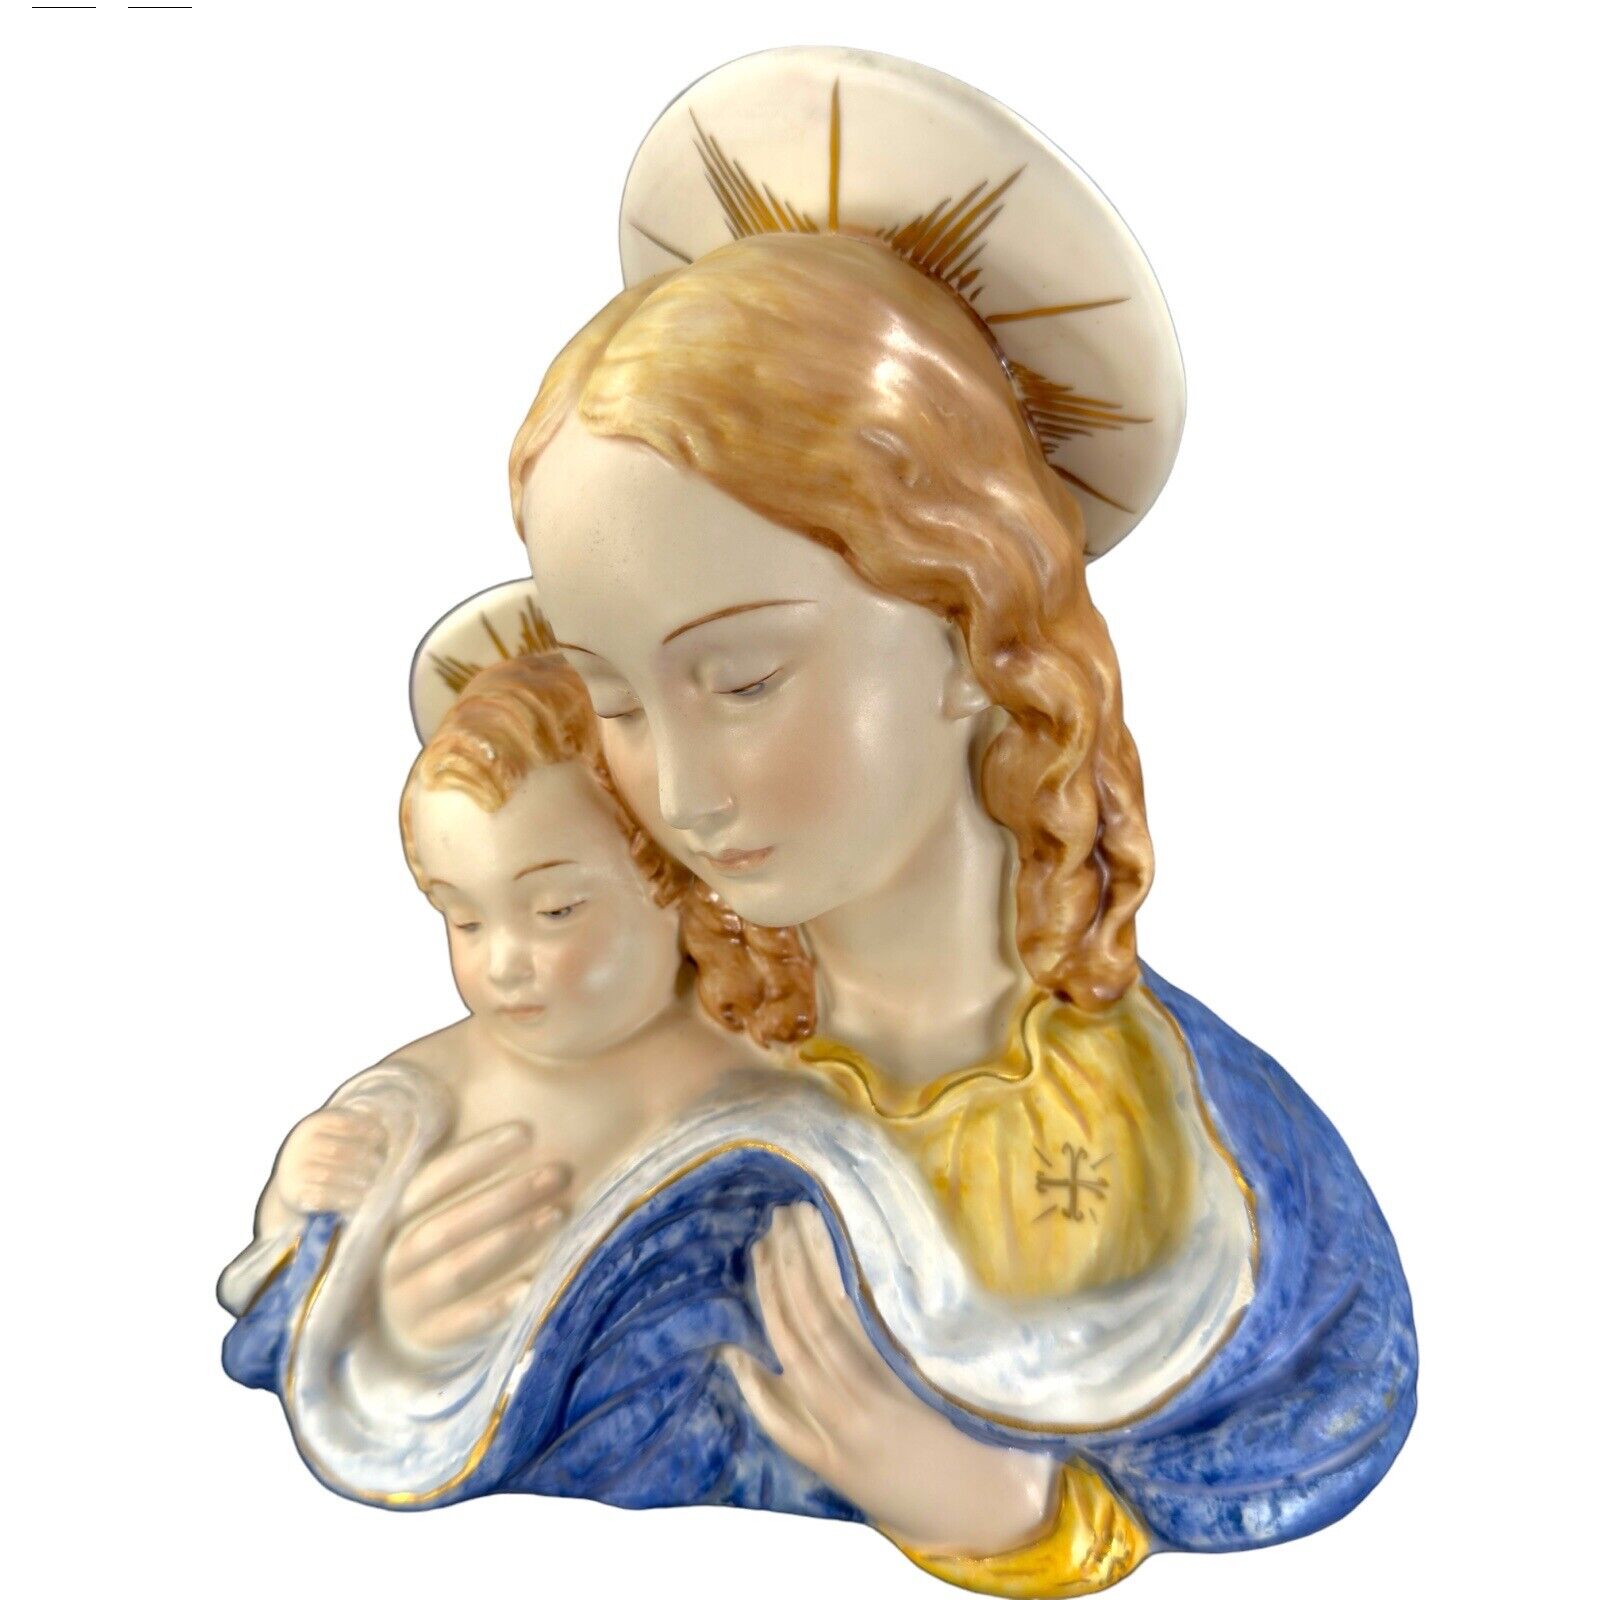 Vintage Italian Pottery Religious Figure Madonna And Child Porcelain Made Italy